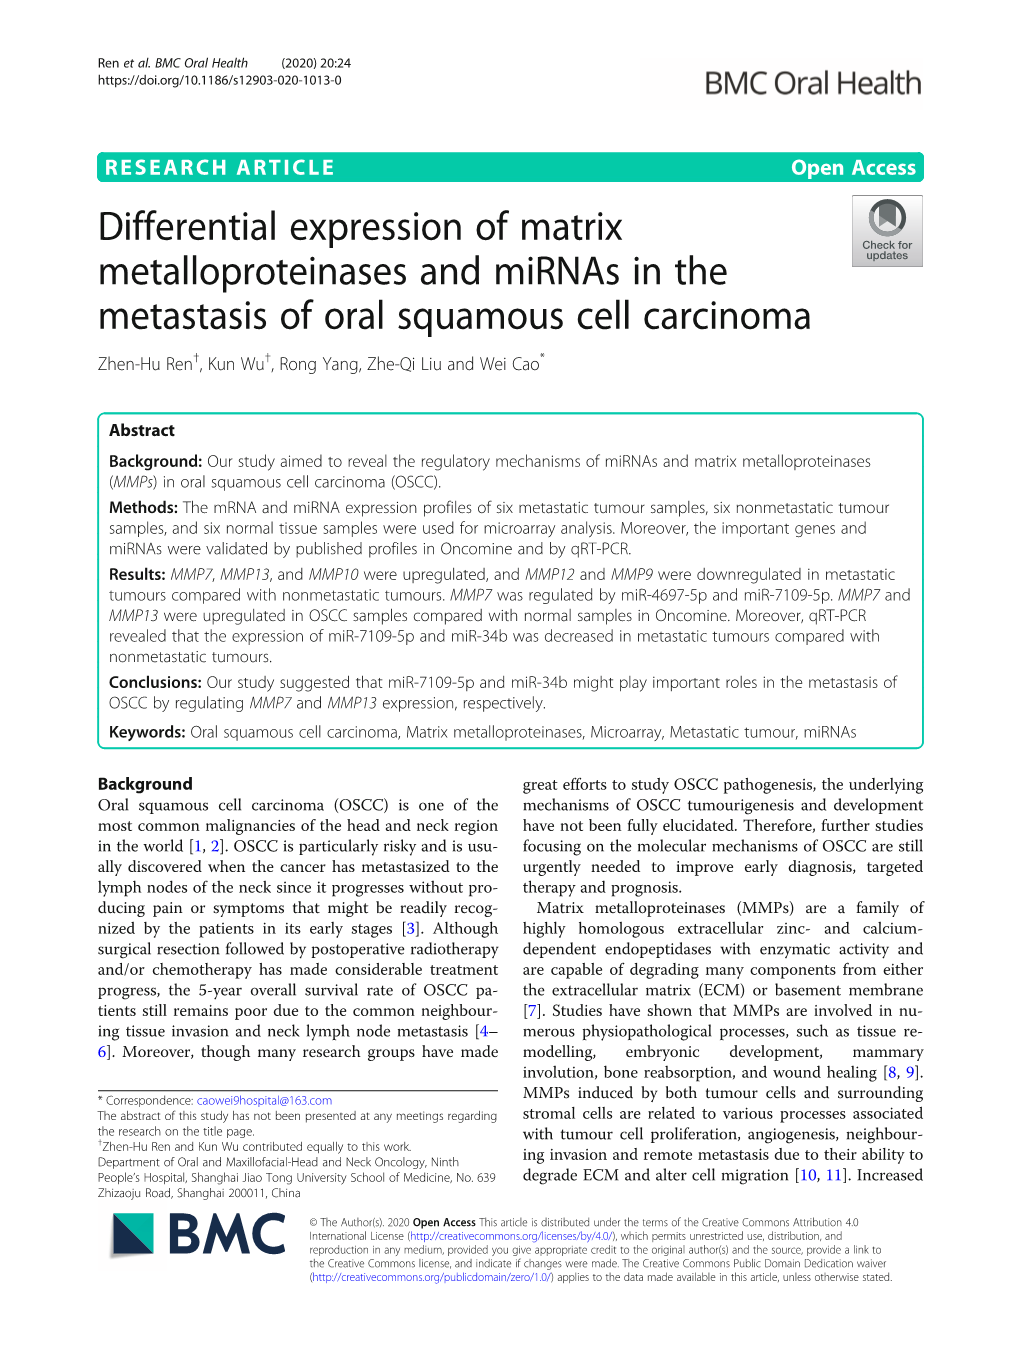 Differential Expression of Matrix Metalloproteinases and Mirnas In